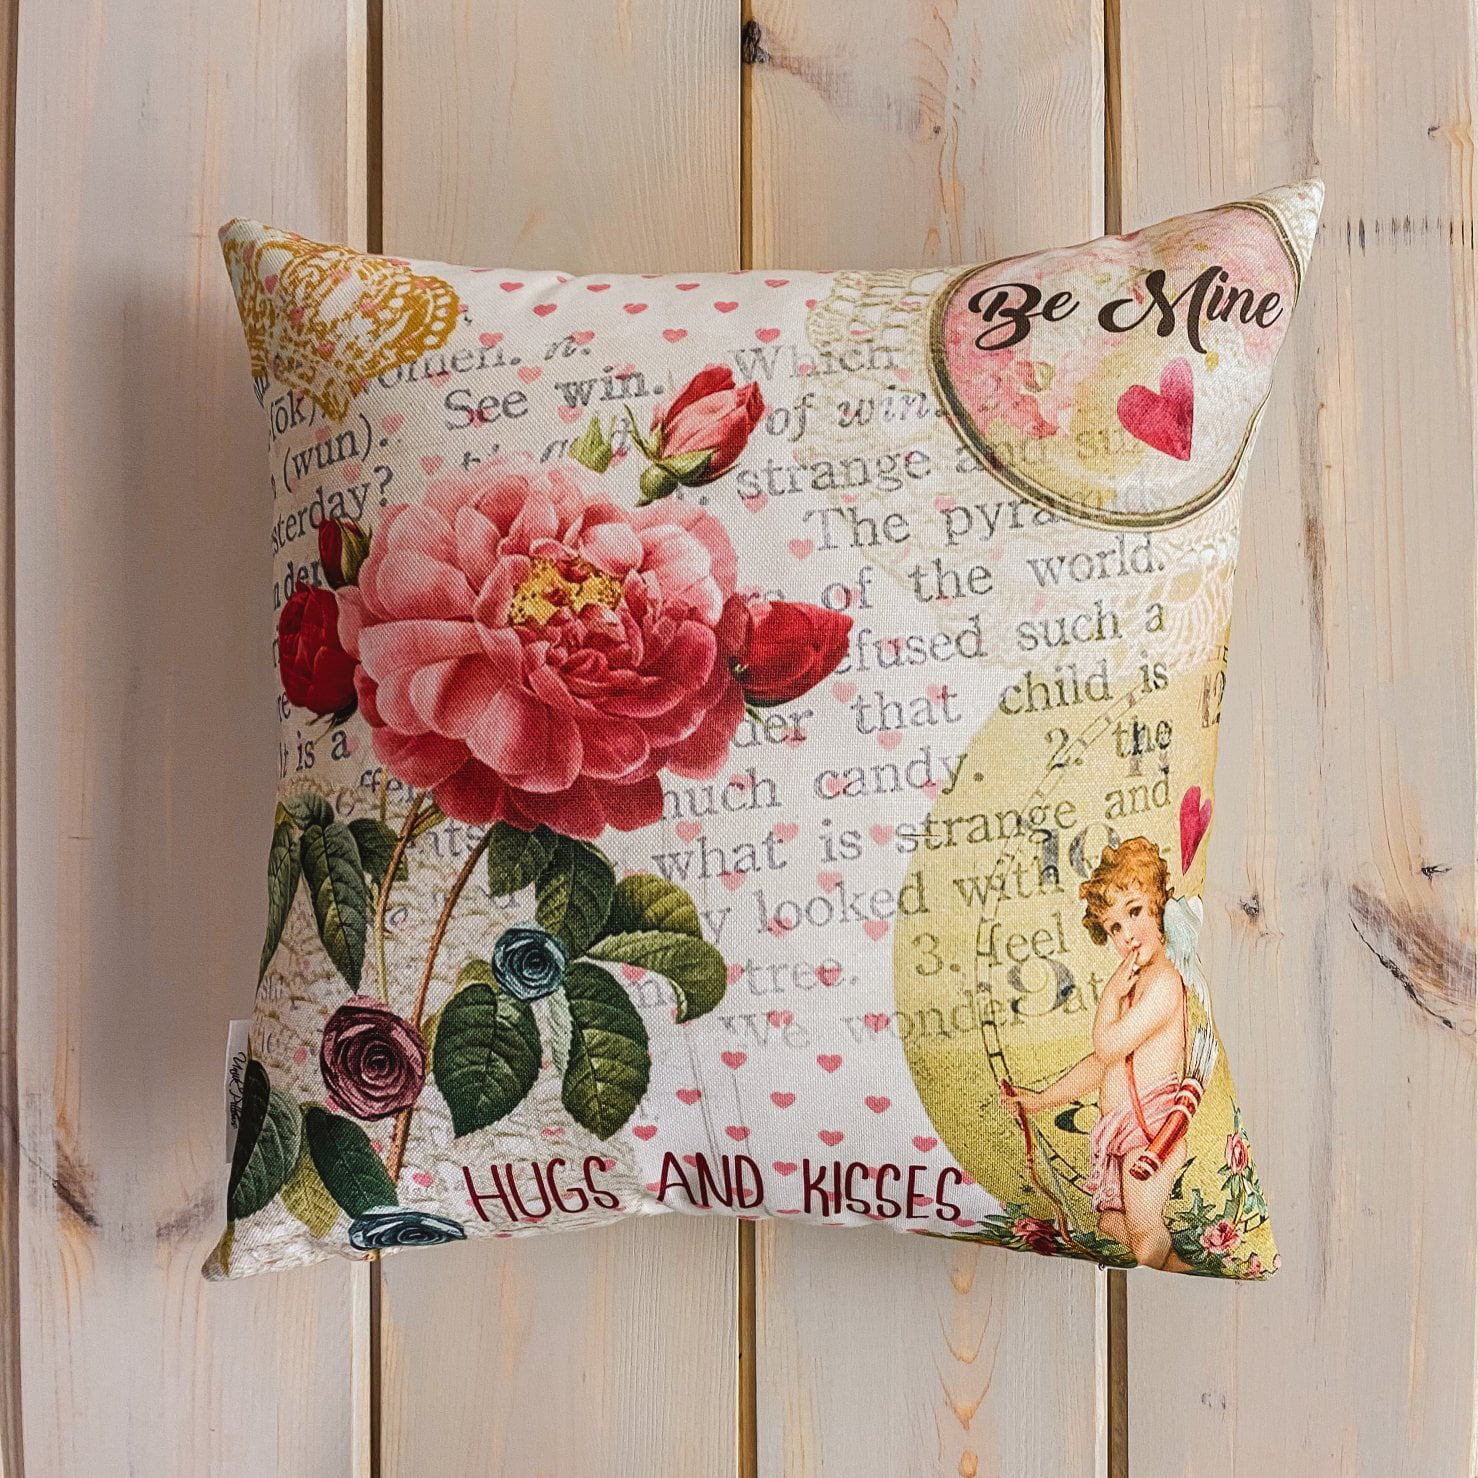 option 2 Personalize Decorate Trow pillow cases: 1 Flower case Personalize Sweet heart tree and 1